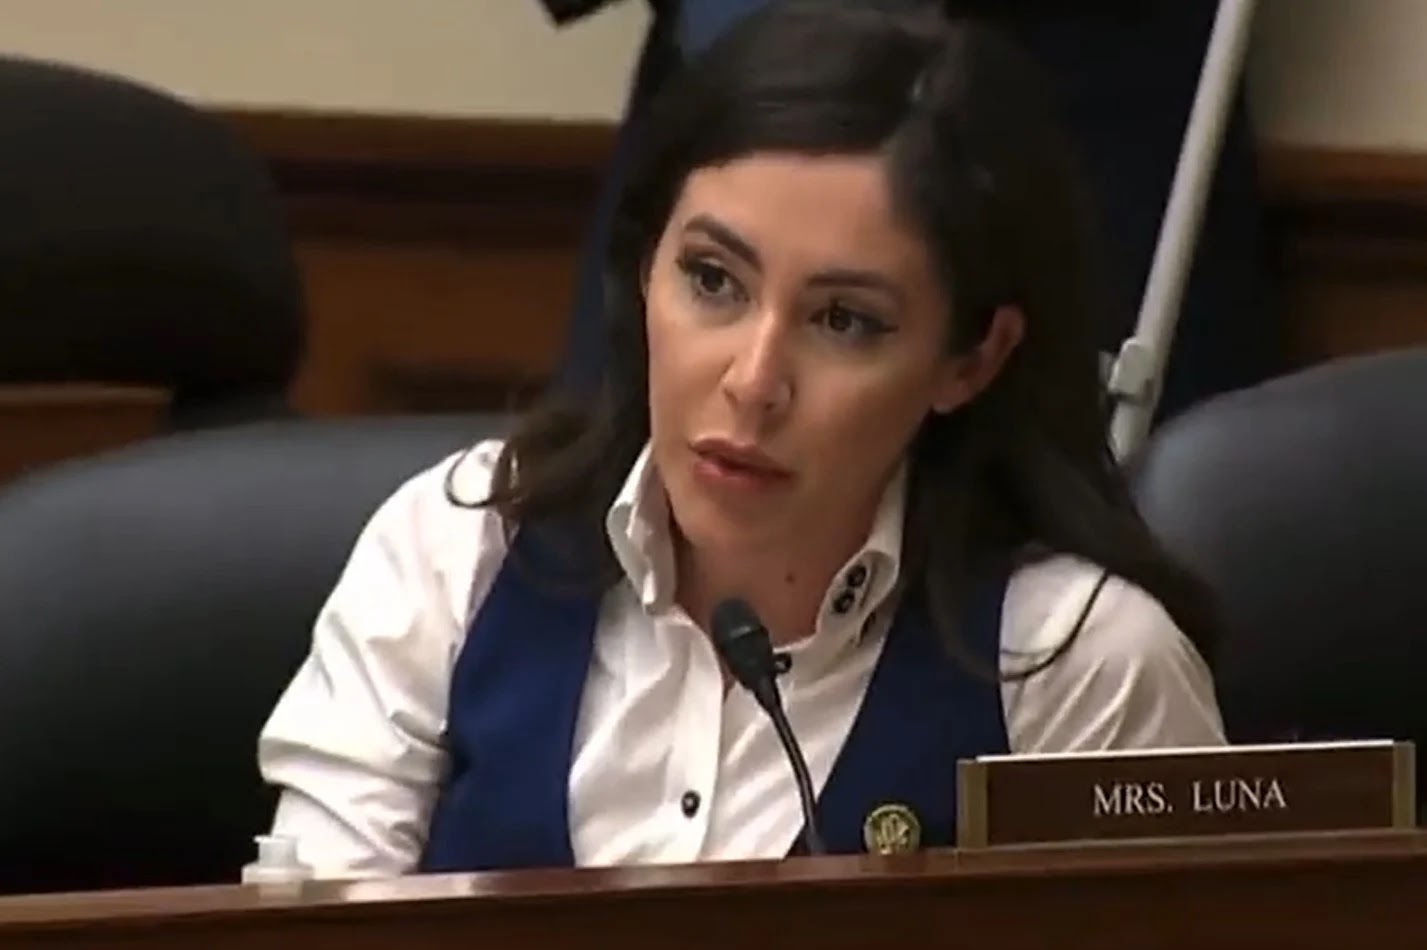 A STAR IS BORN! Rep. Anna Paulina Luna TORCHES Yoel Roth – Exposes Democrat-Big Tech-Government Collusion and Former TWITTER EXECS ARE LEFT SPEECHLESS!